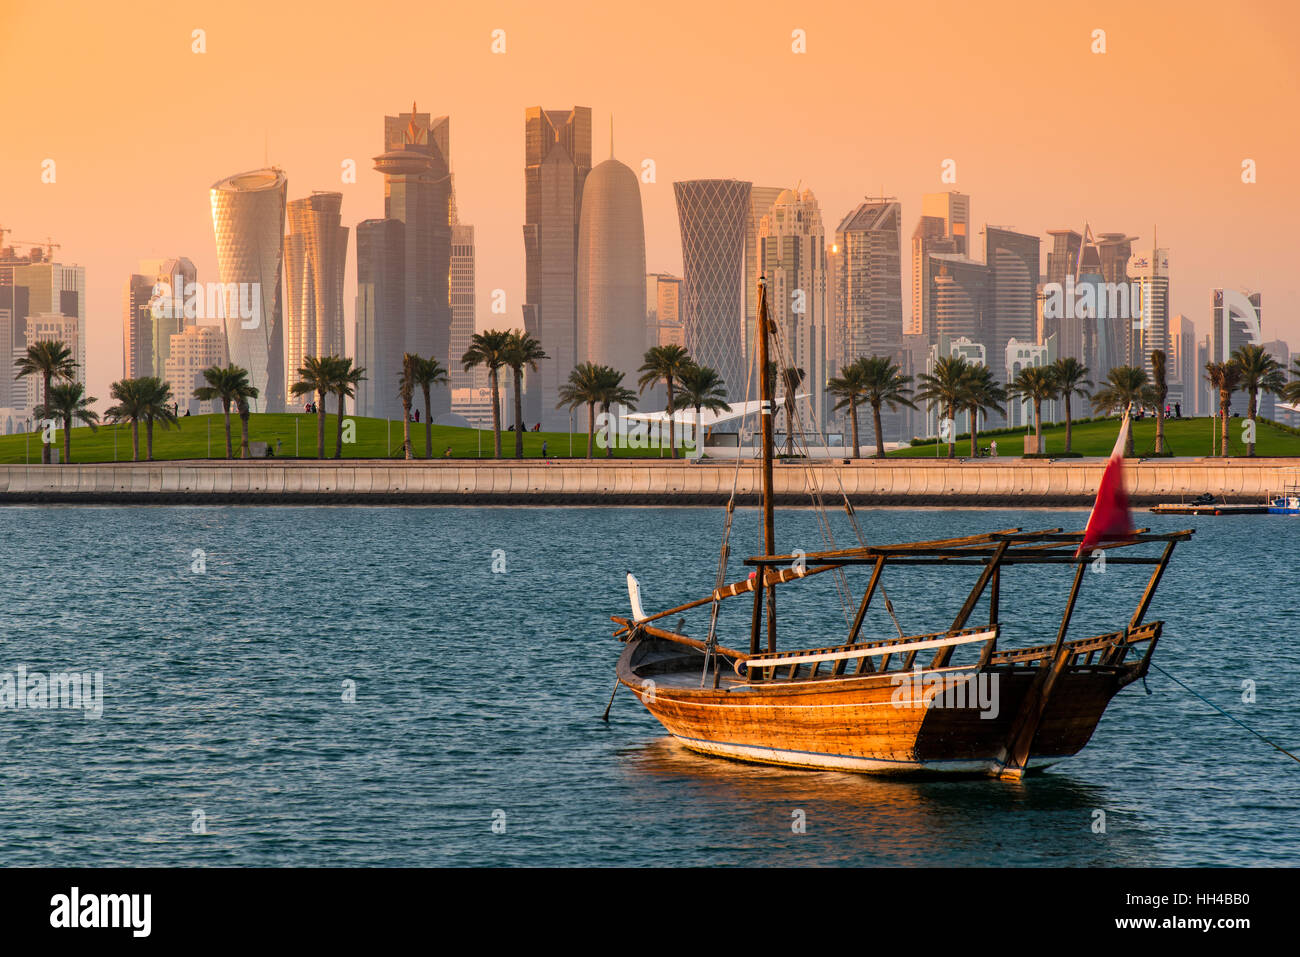 Dhow traditional sailing vessel with the financial area skyline behind at sunset, Doha, Qatar Stock Photo